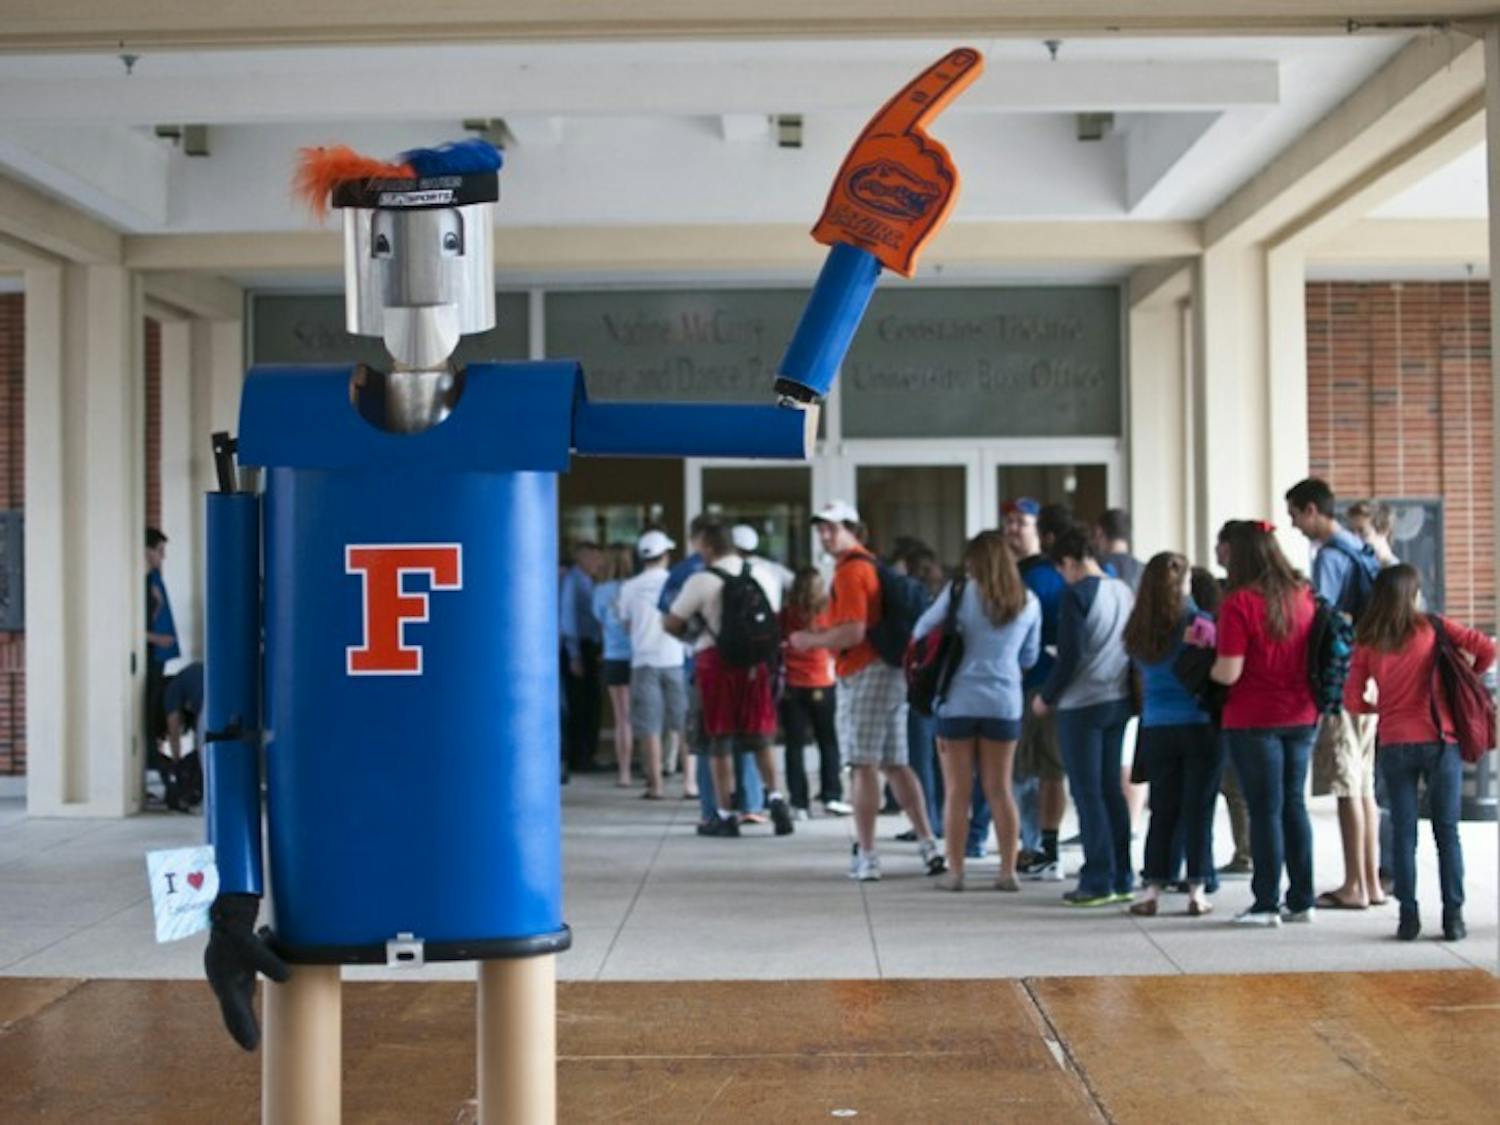 A 7-foot robot named Otto built by the Gator Robotics club stands on display on the Colonnade last Wednesday. The robot is a replica of the original bot, which was built in 1957 by an electrical engineering student from UF.